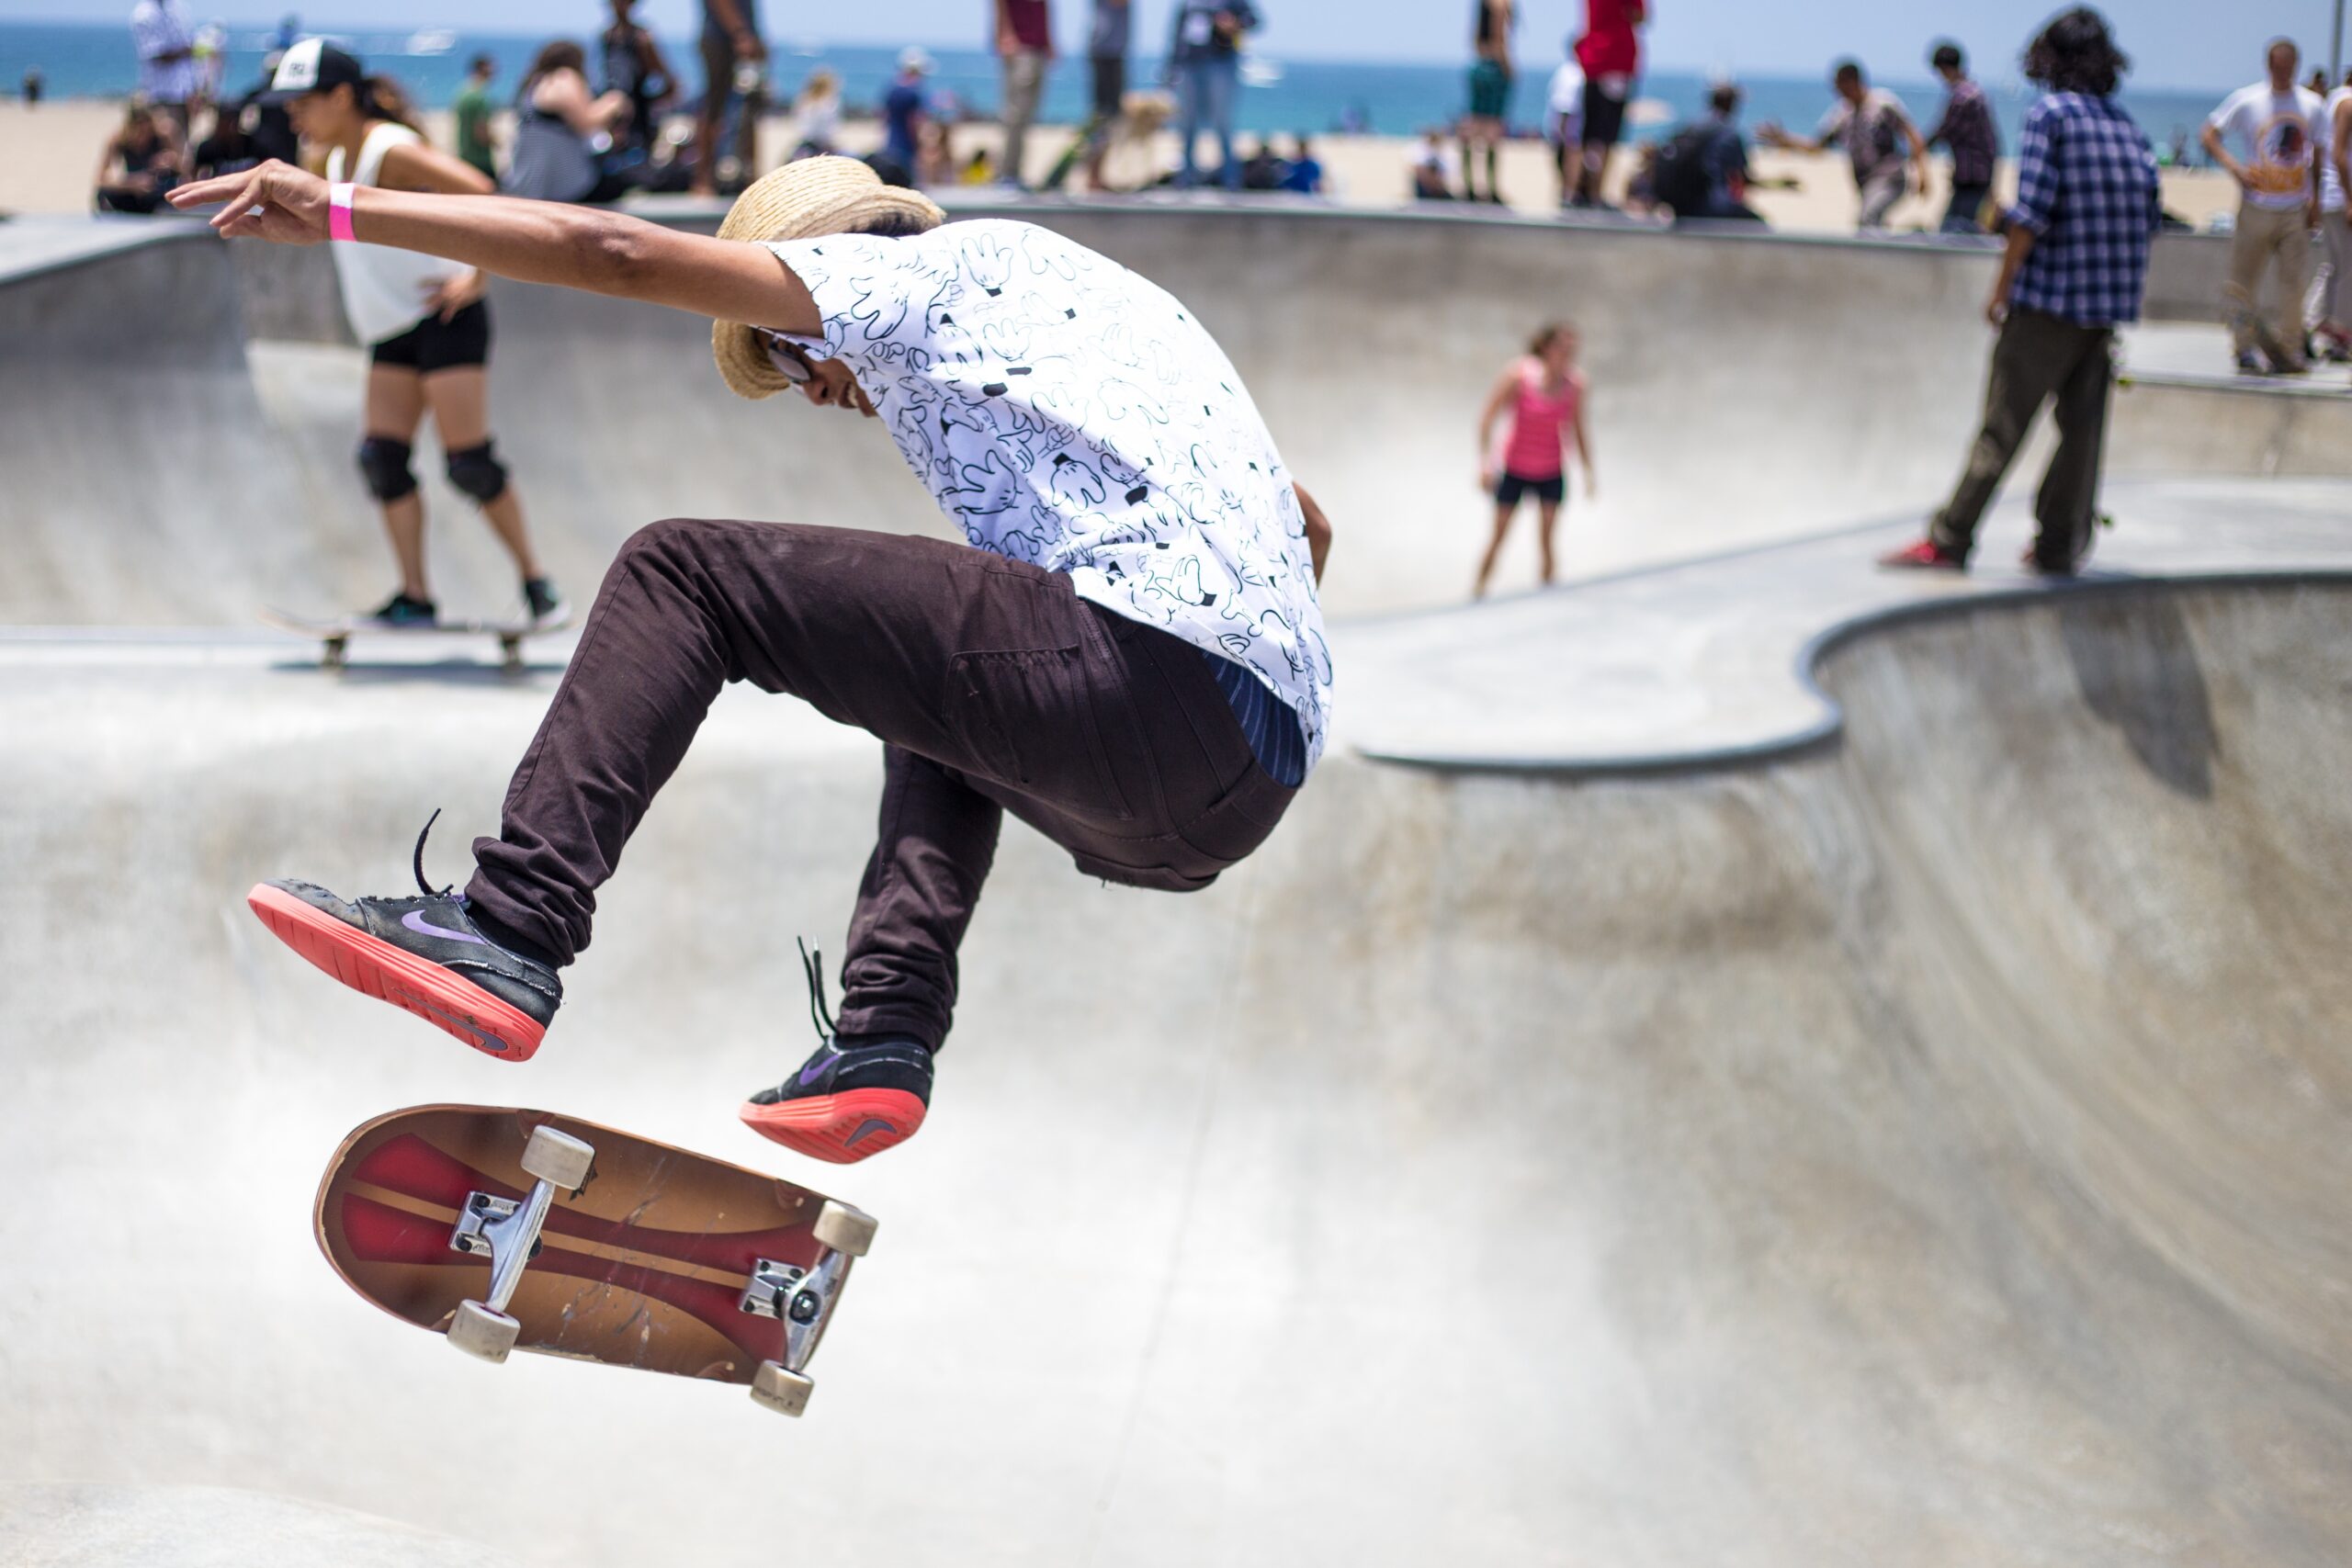 How Do You Choose Skateboard Shoes With Durable Soles For Grip?